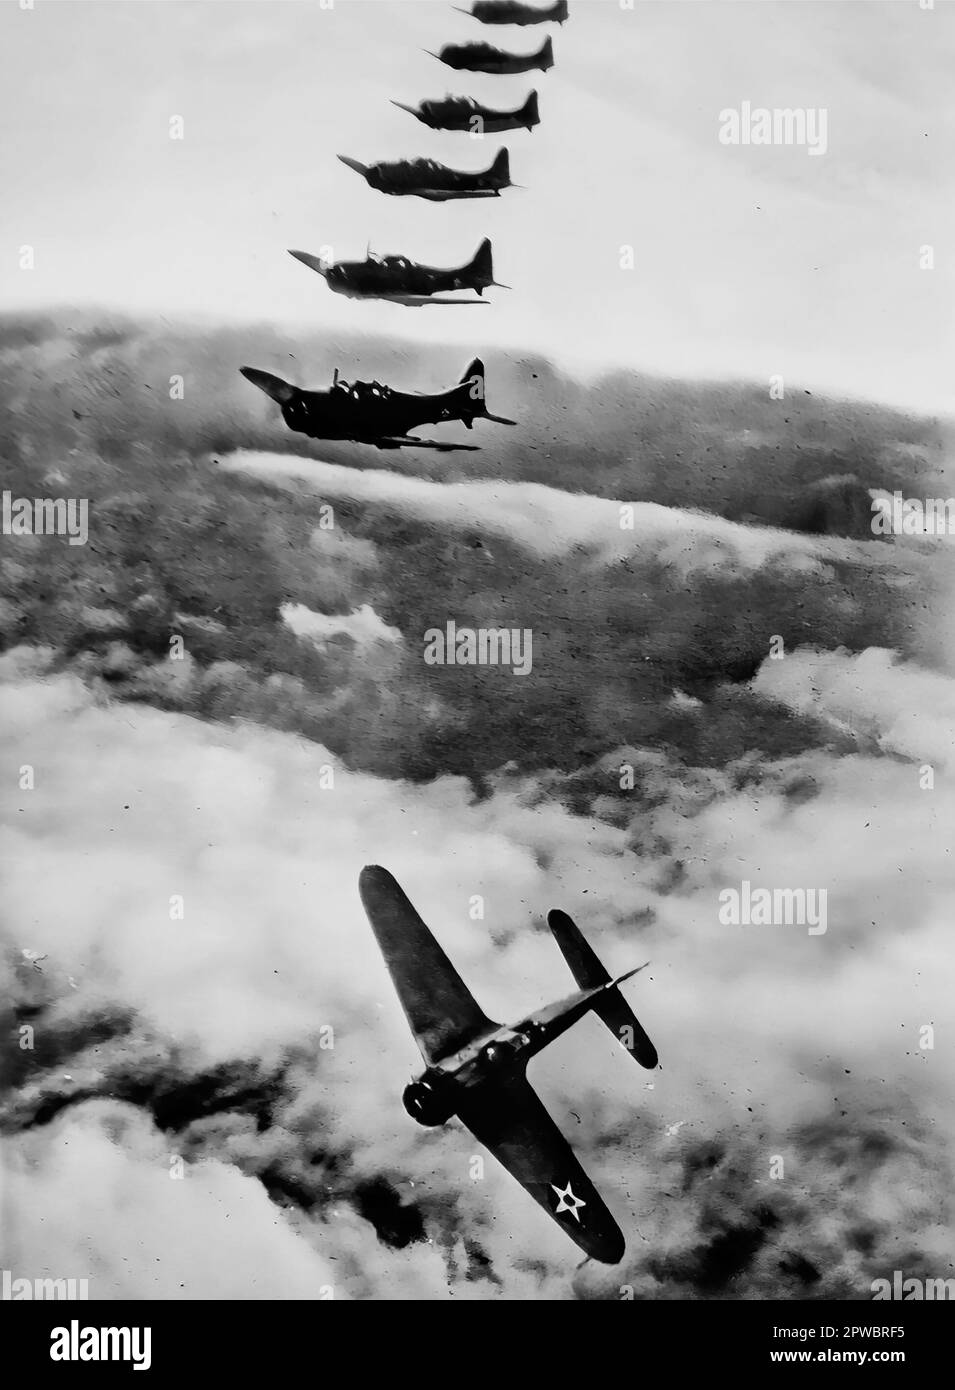 An image of a flight of Douglas SBD-1 dive bombers.  Built between 1940 and 1944 they played an important role in The Battle of Midway in 1942. Stock Photo